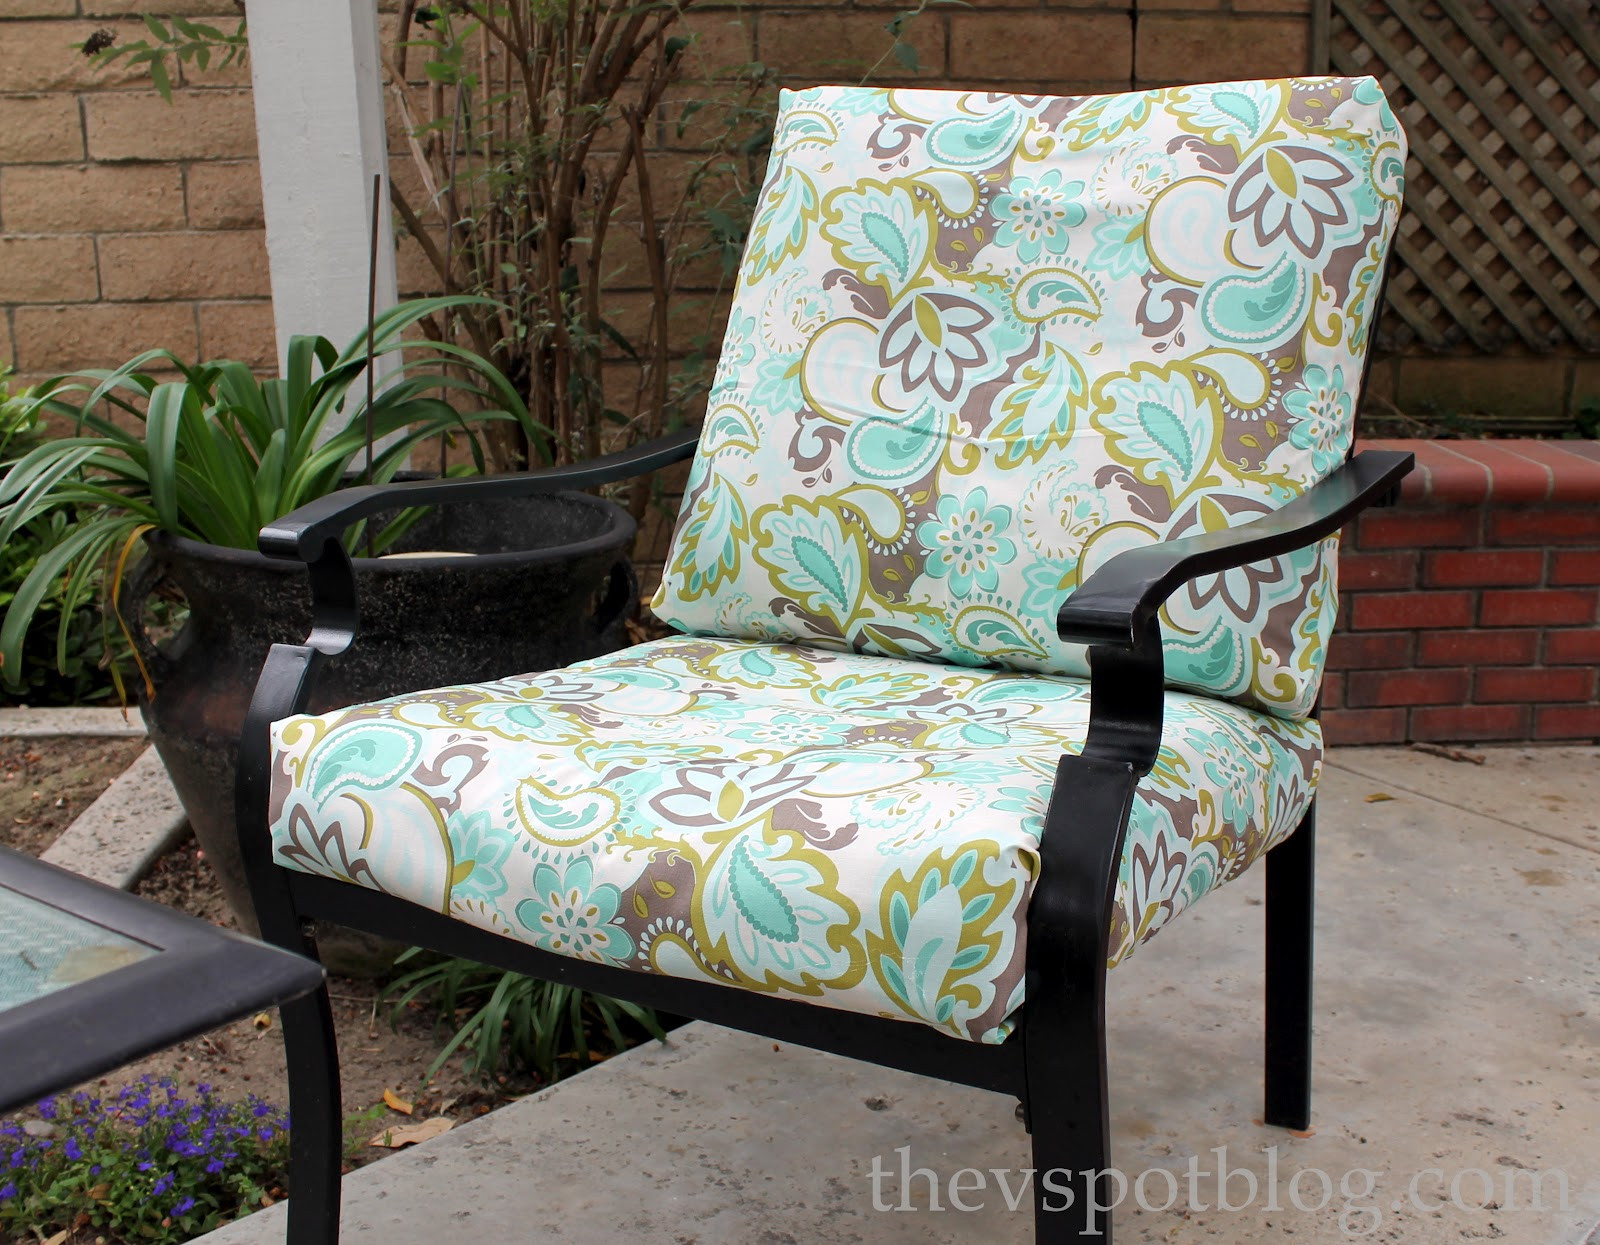 DIY Outdoor Cushions No Sew
 Recover your Outdoor cushions No Sewing